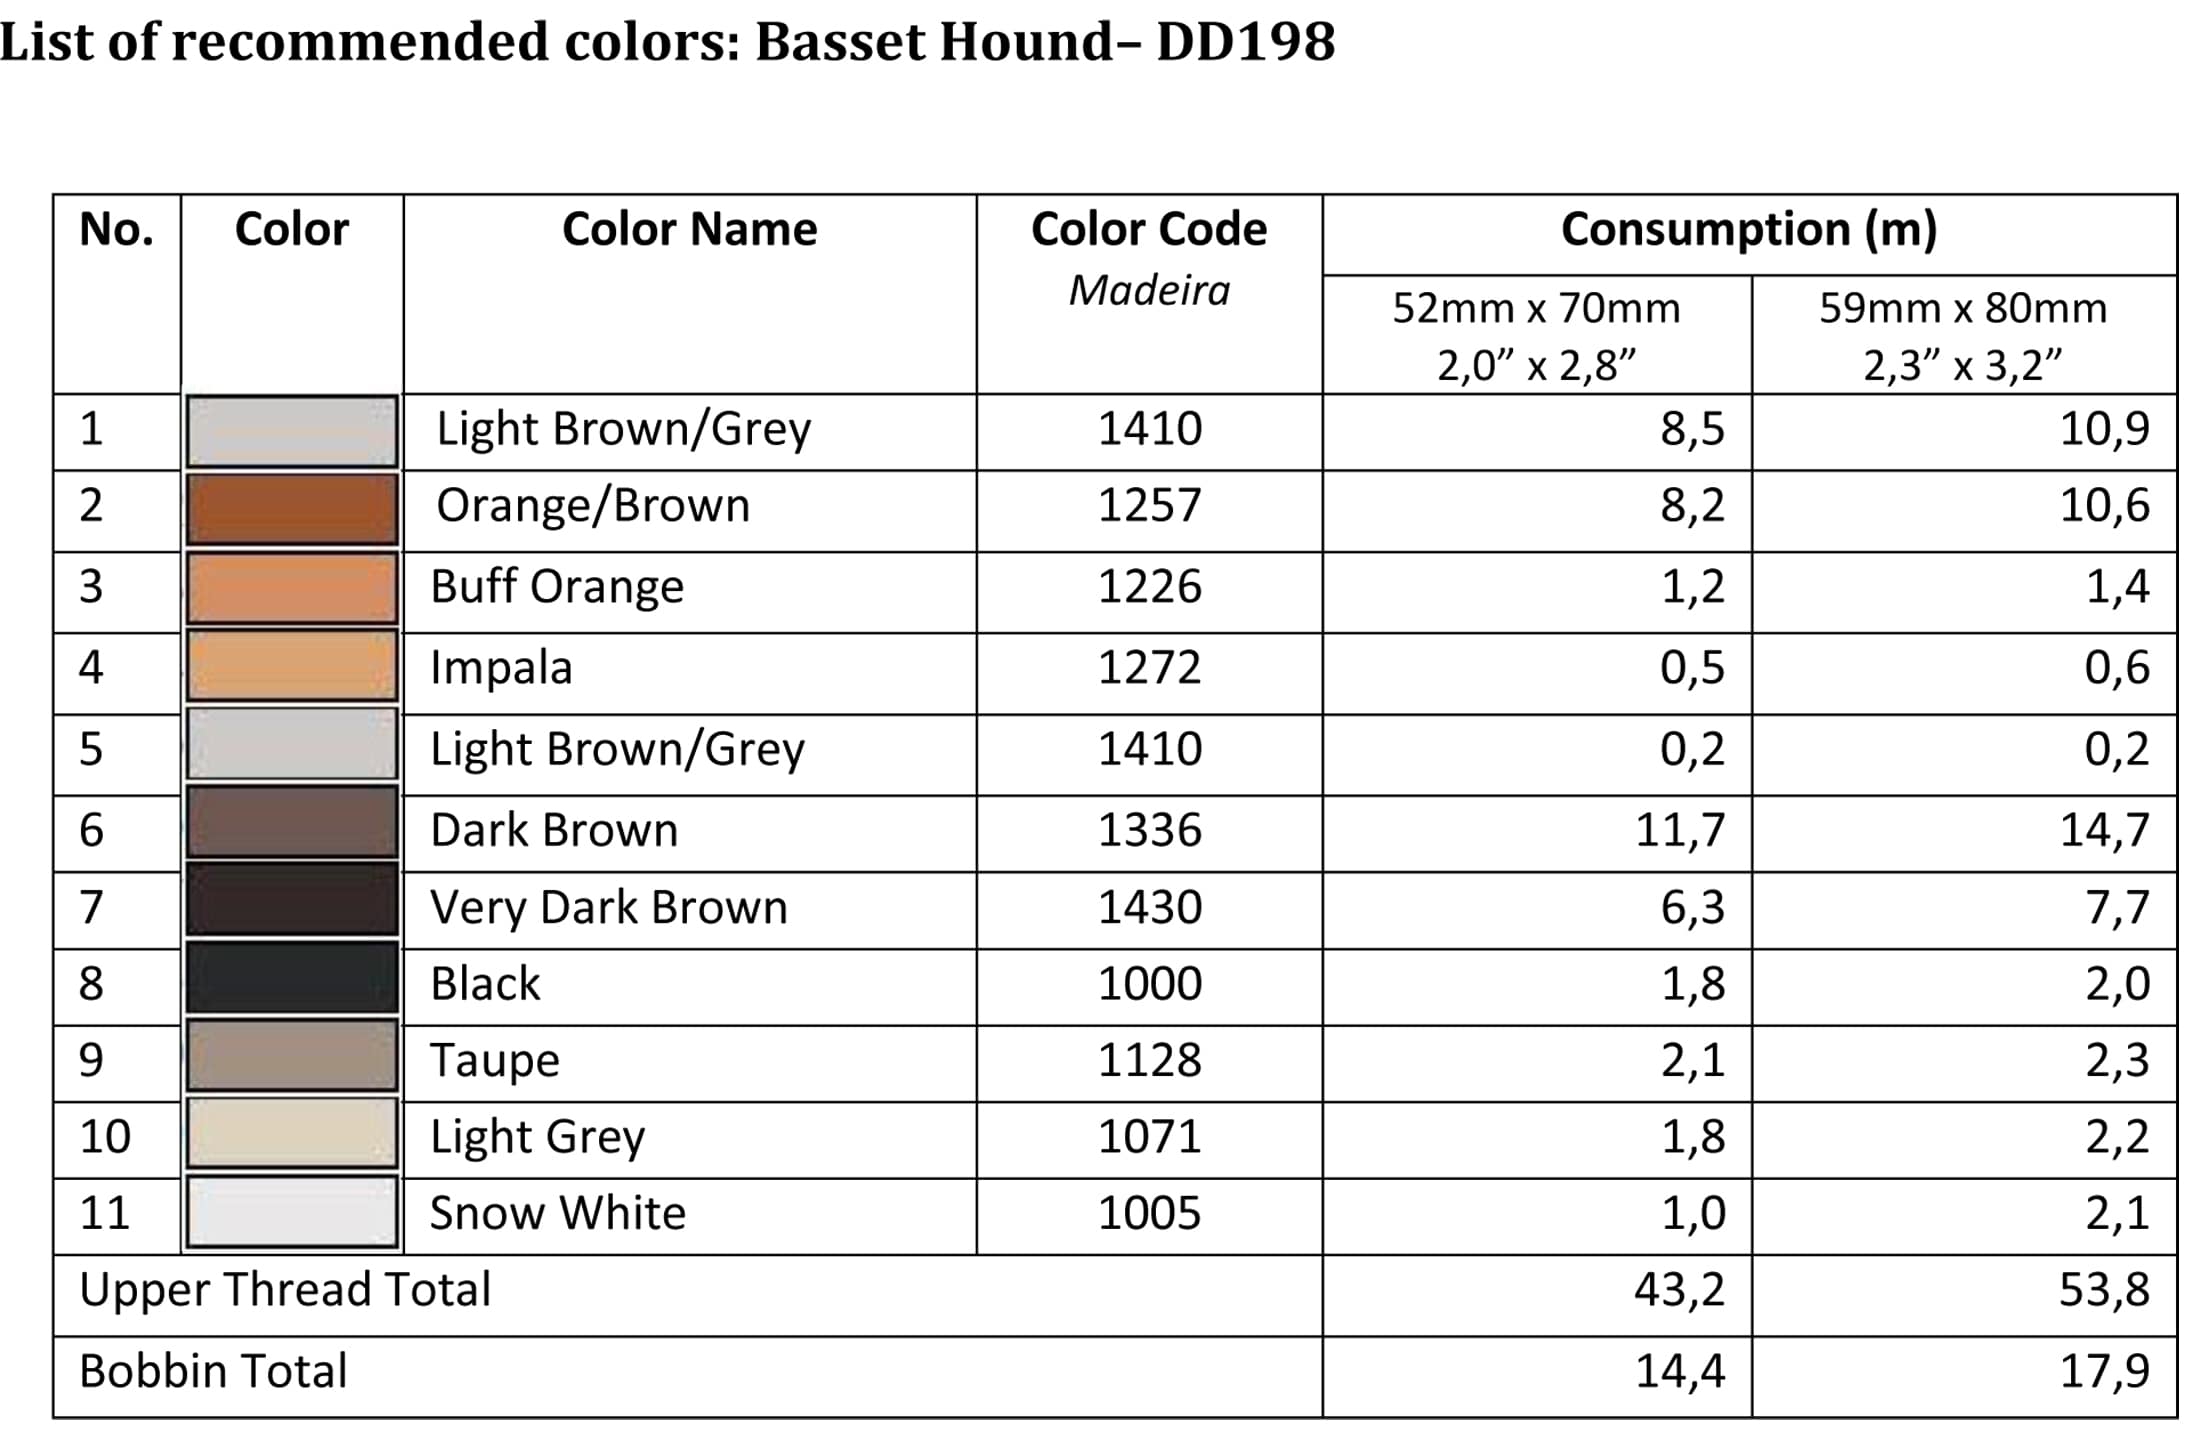 List of recommended colors - DD198